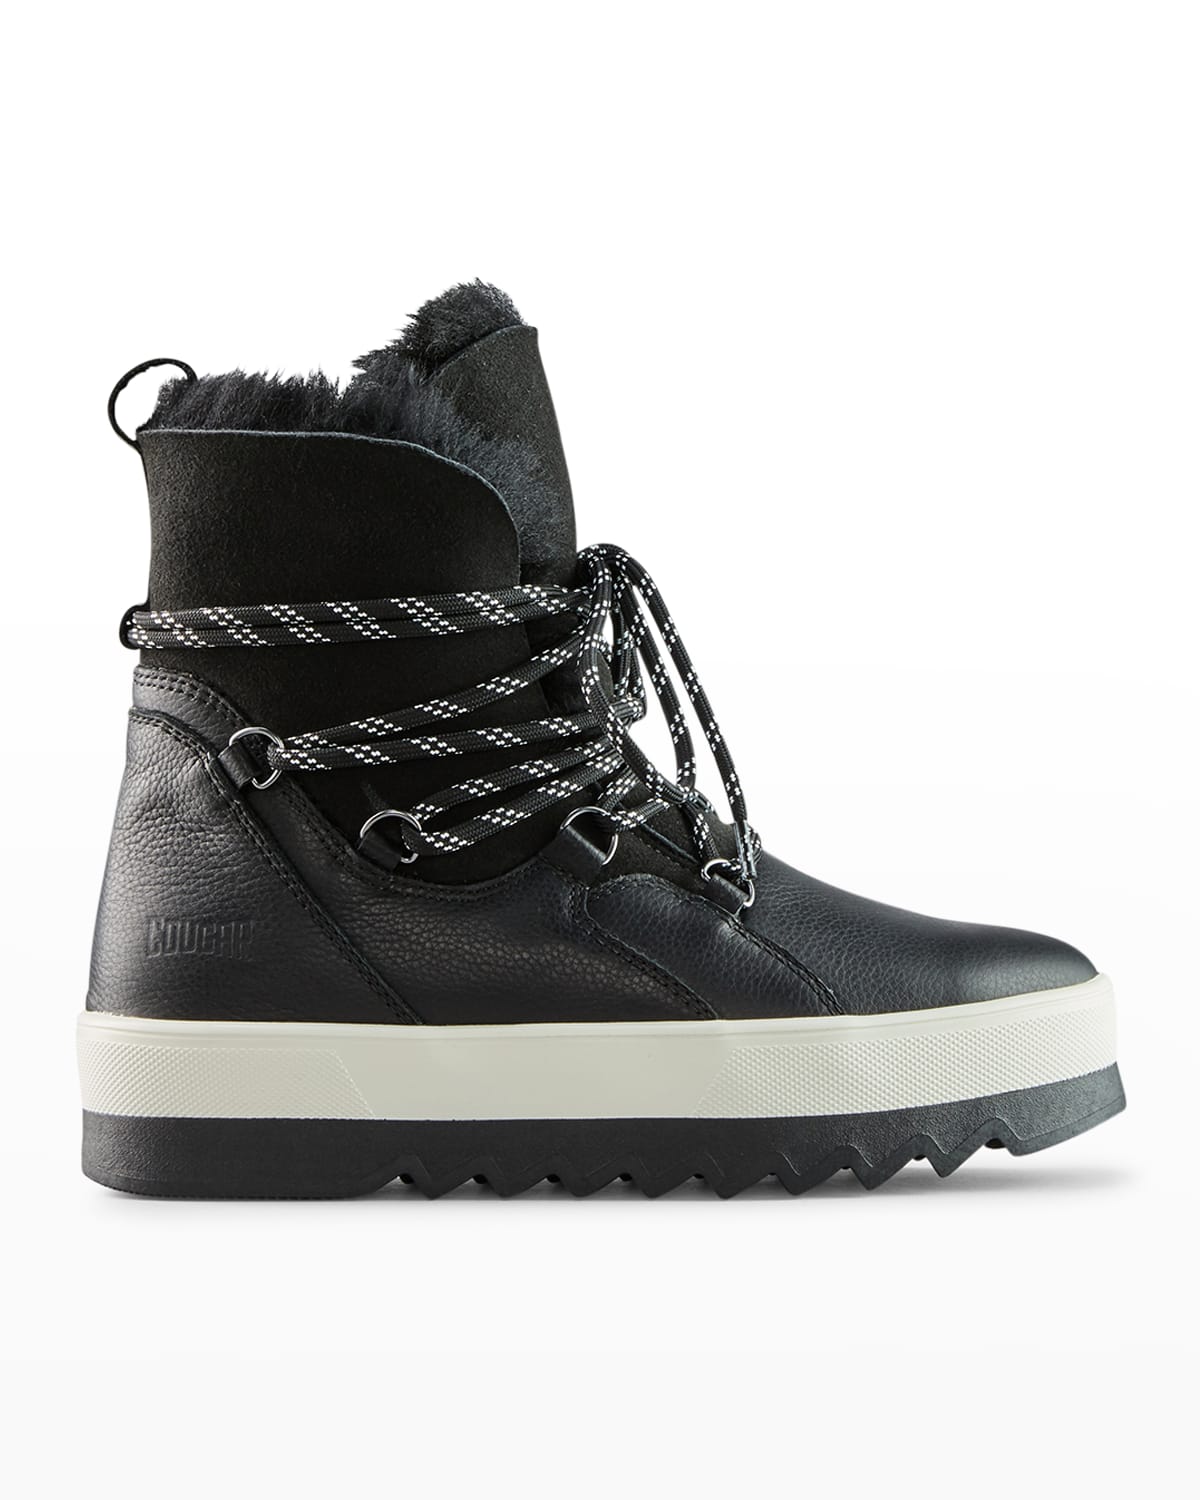 V-Five-L Leather Shearling Snow Booties